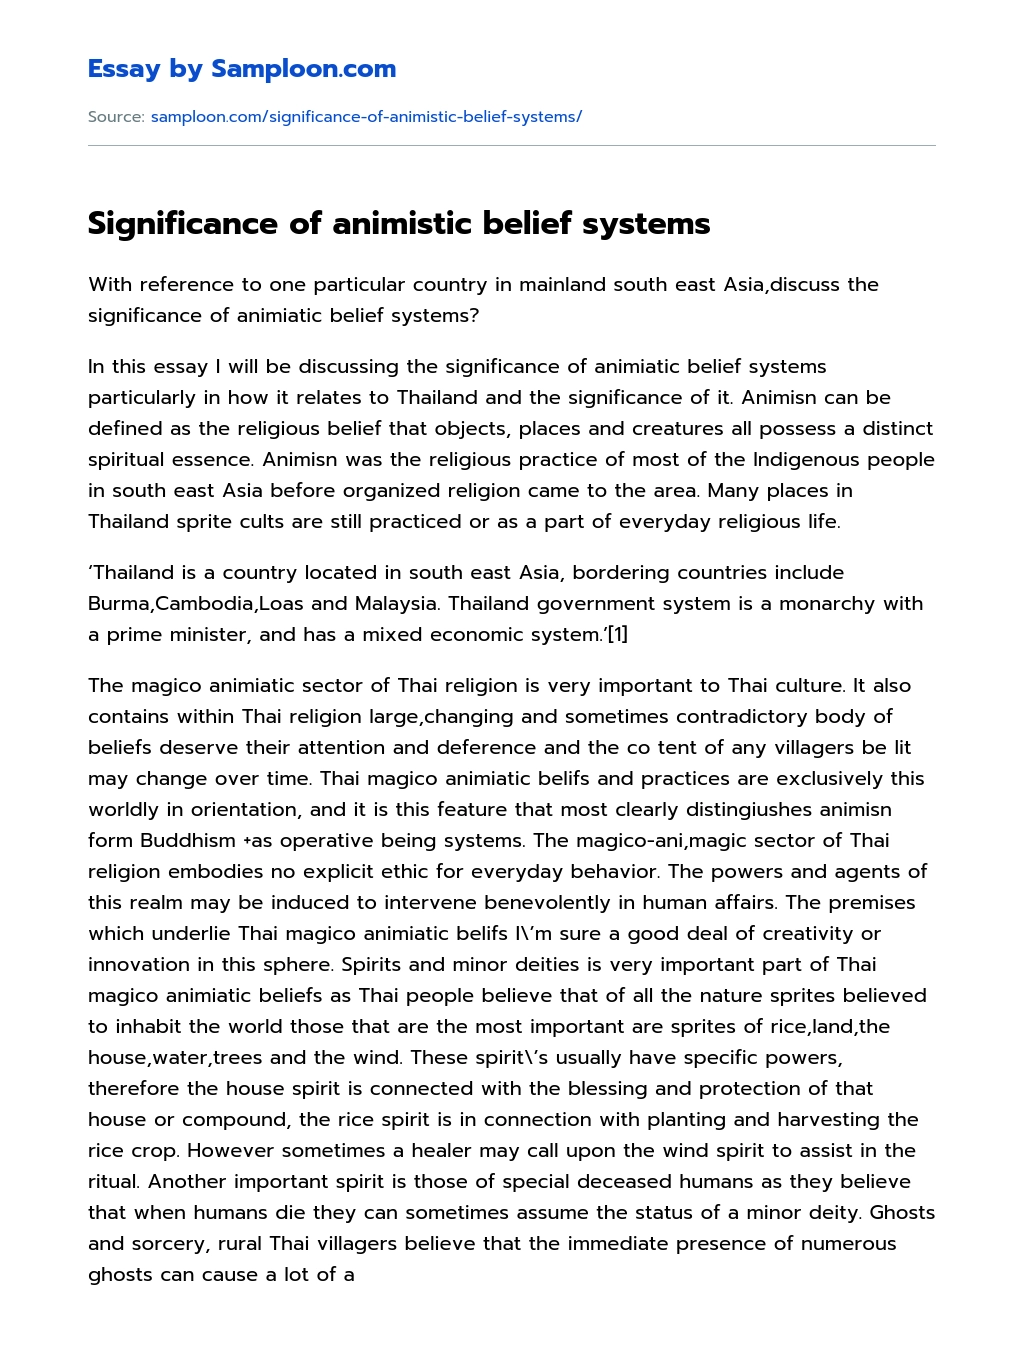 Significance of animistic belief systems essay